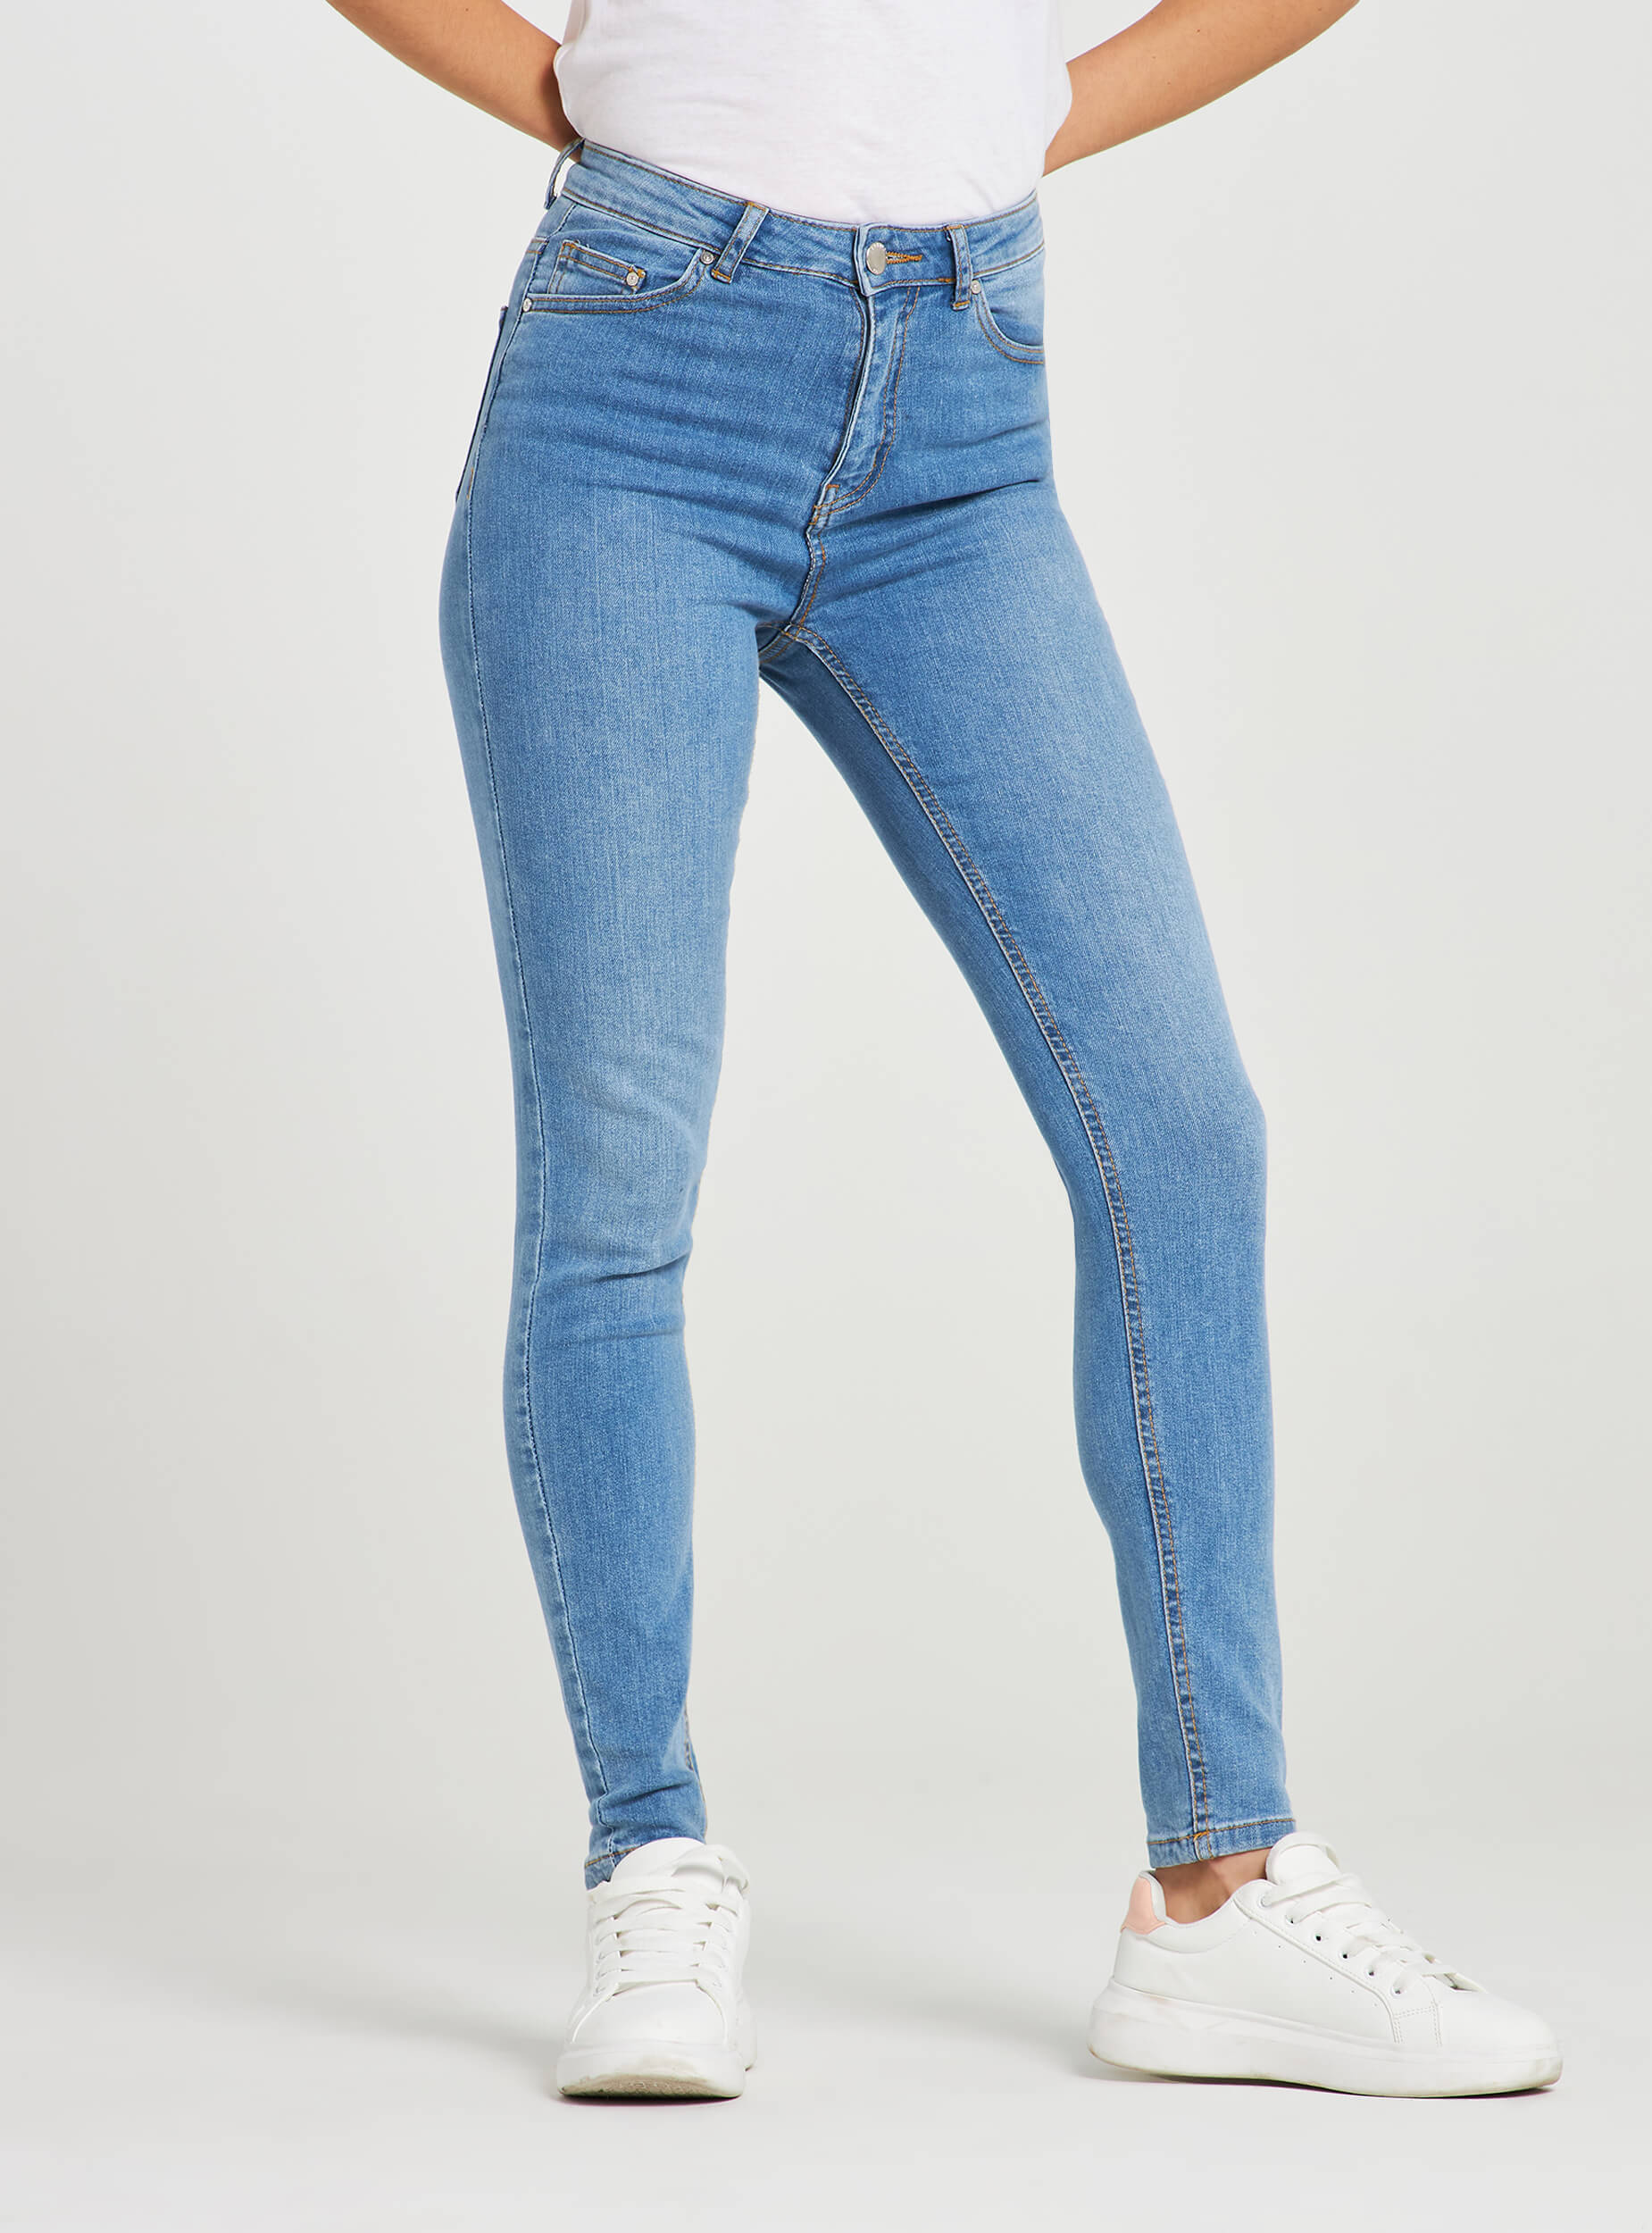 high waisted stretch jeans